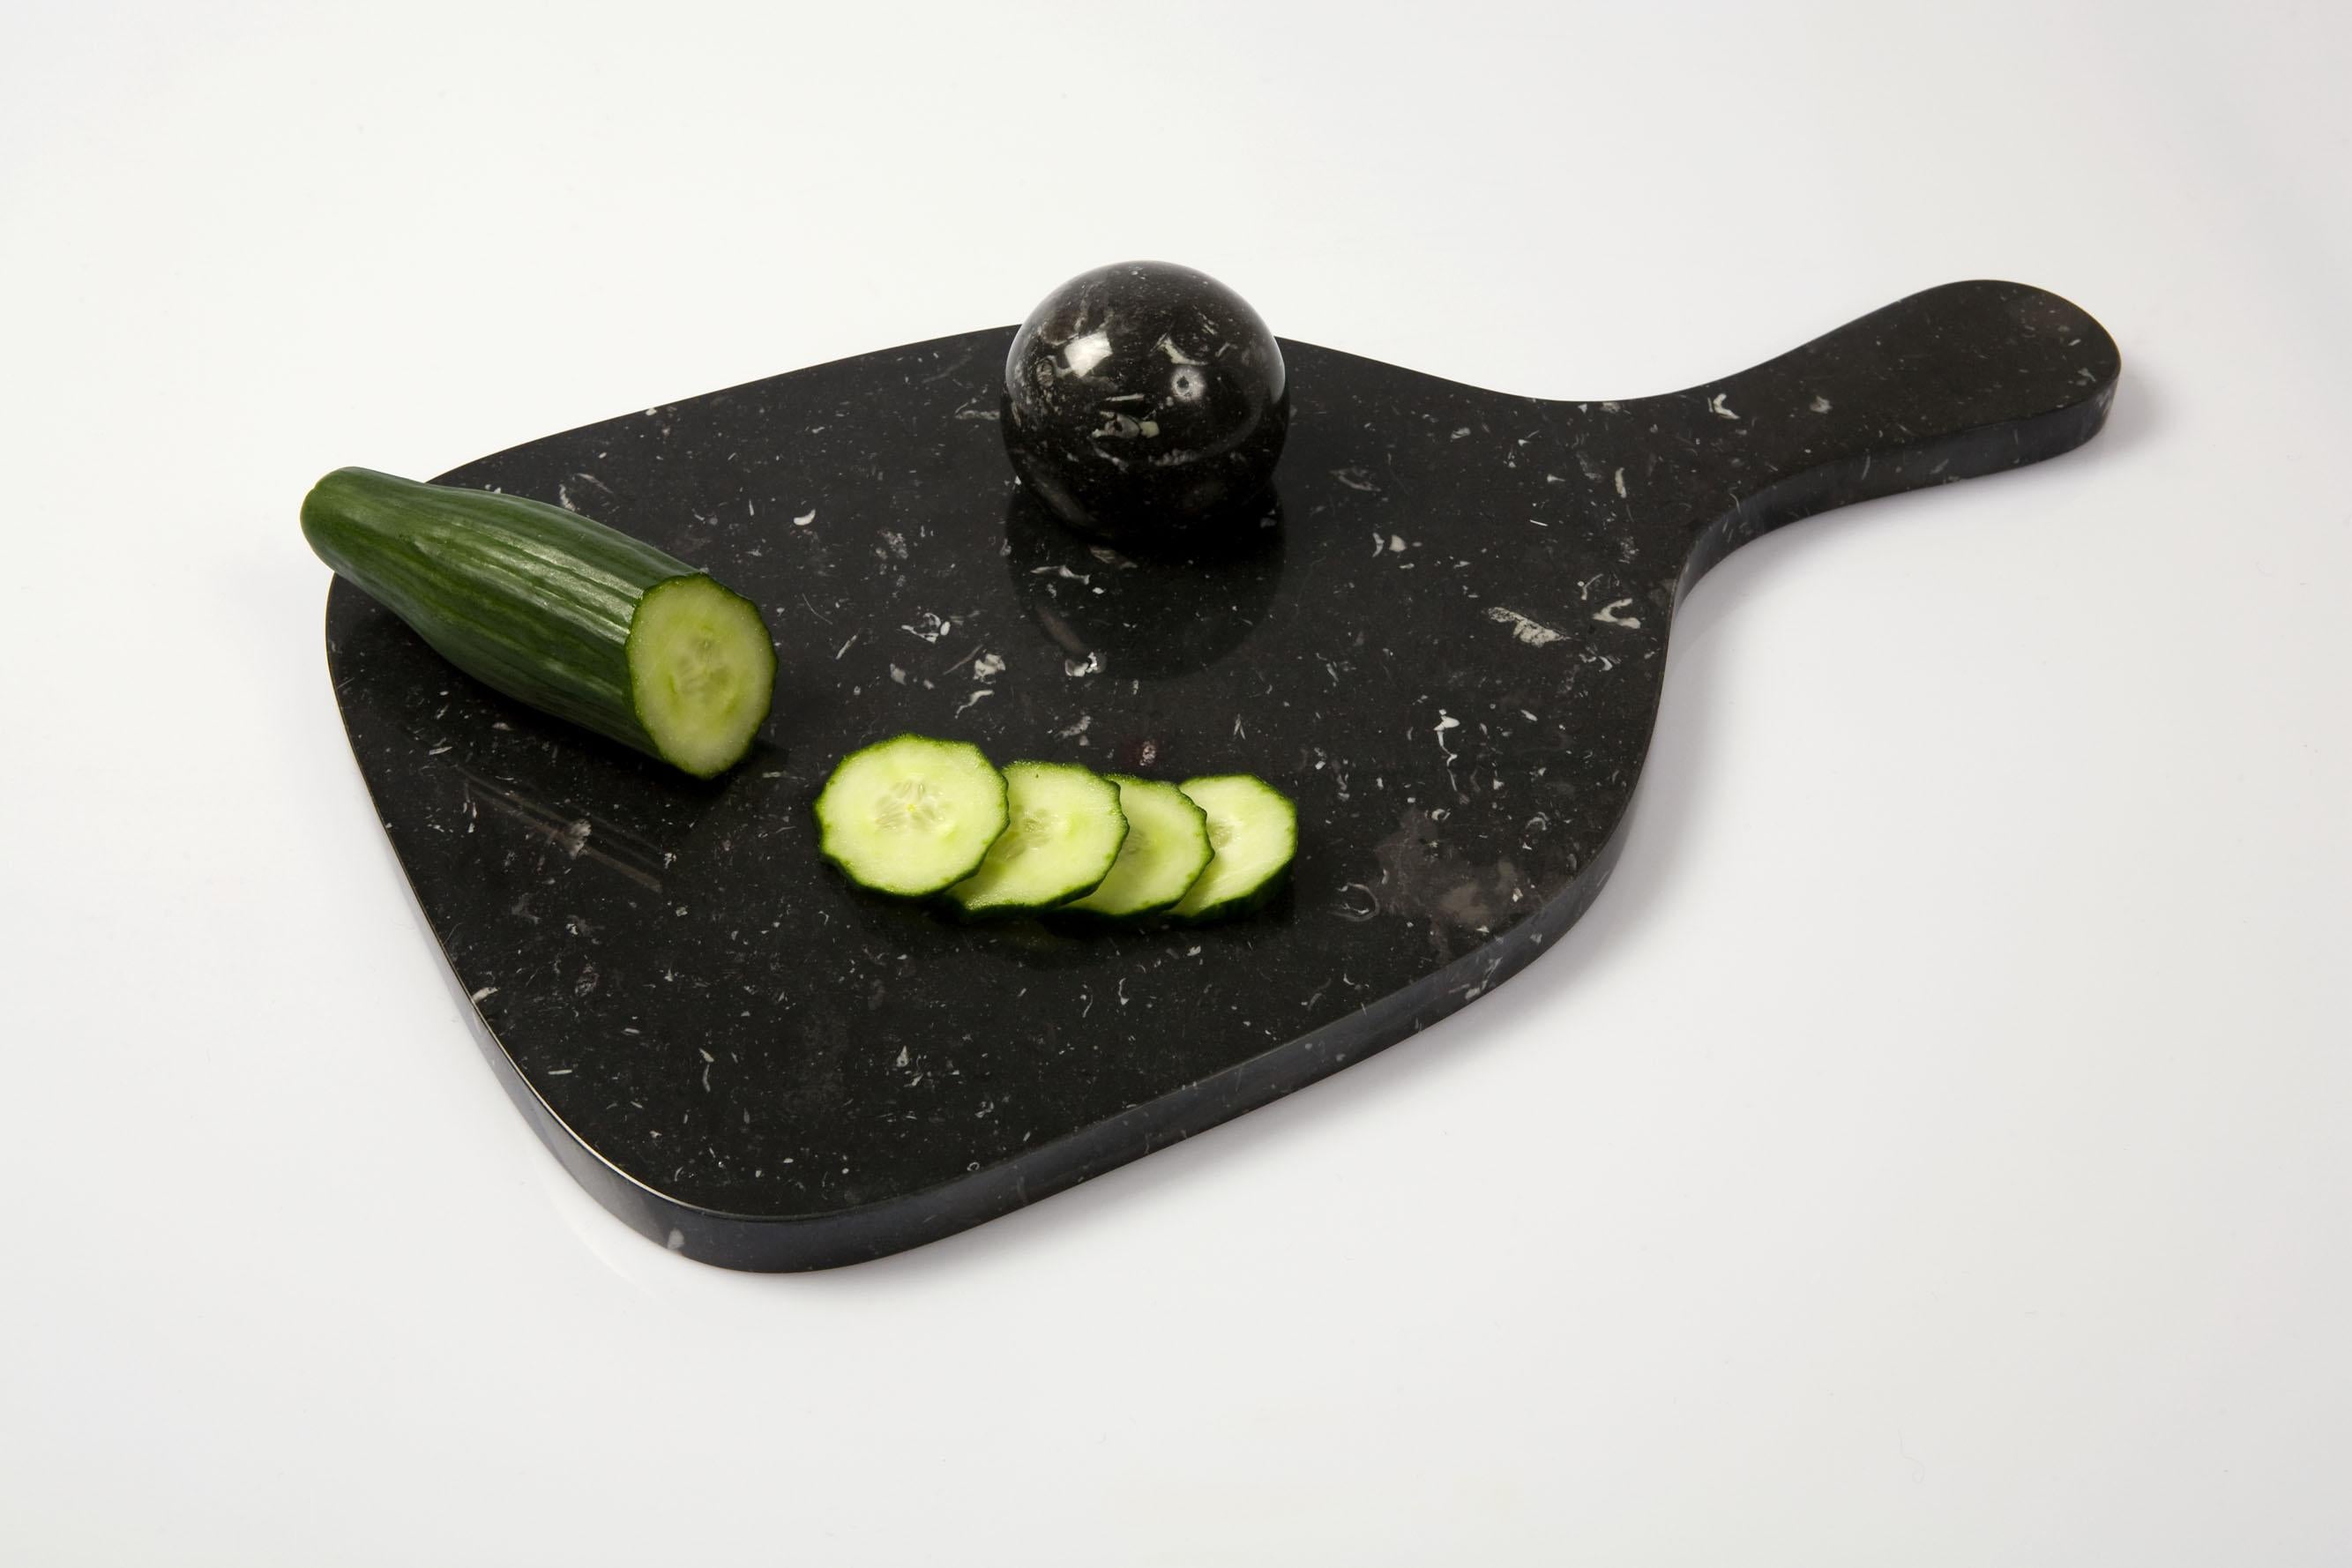 Post-Modern 'Slice me Nice' marble chopping board-come-herb crusher For Sale